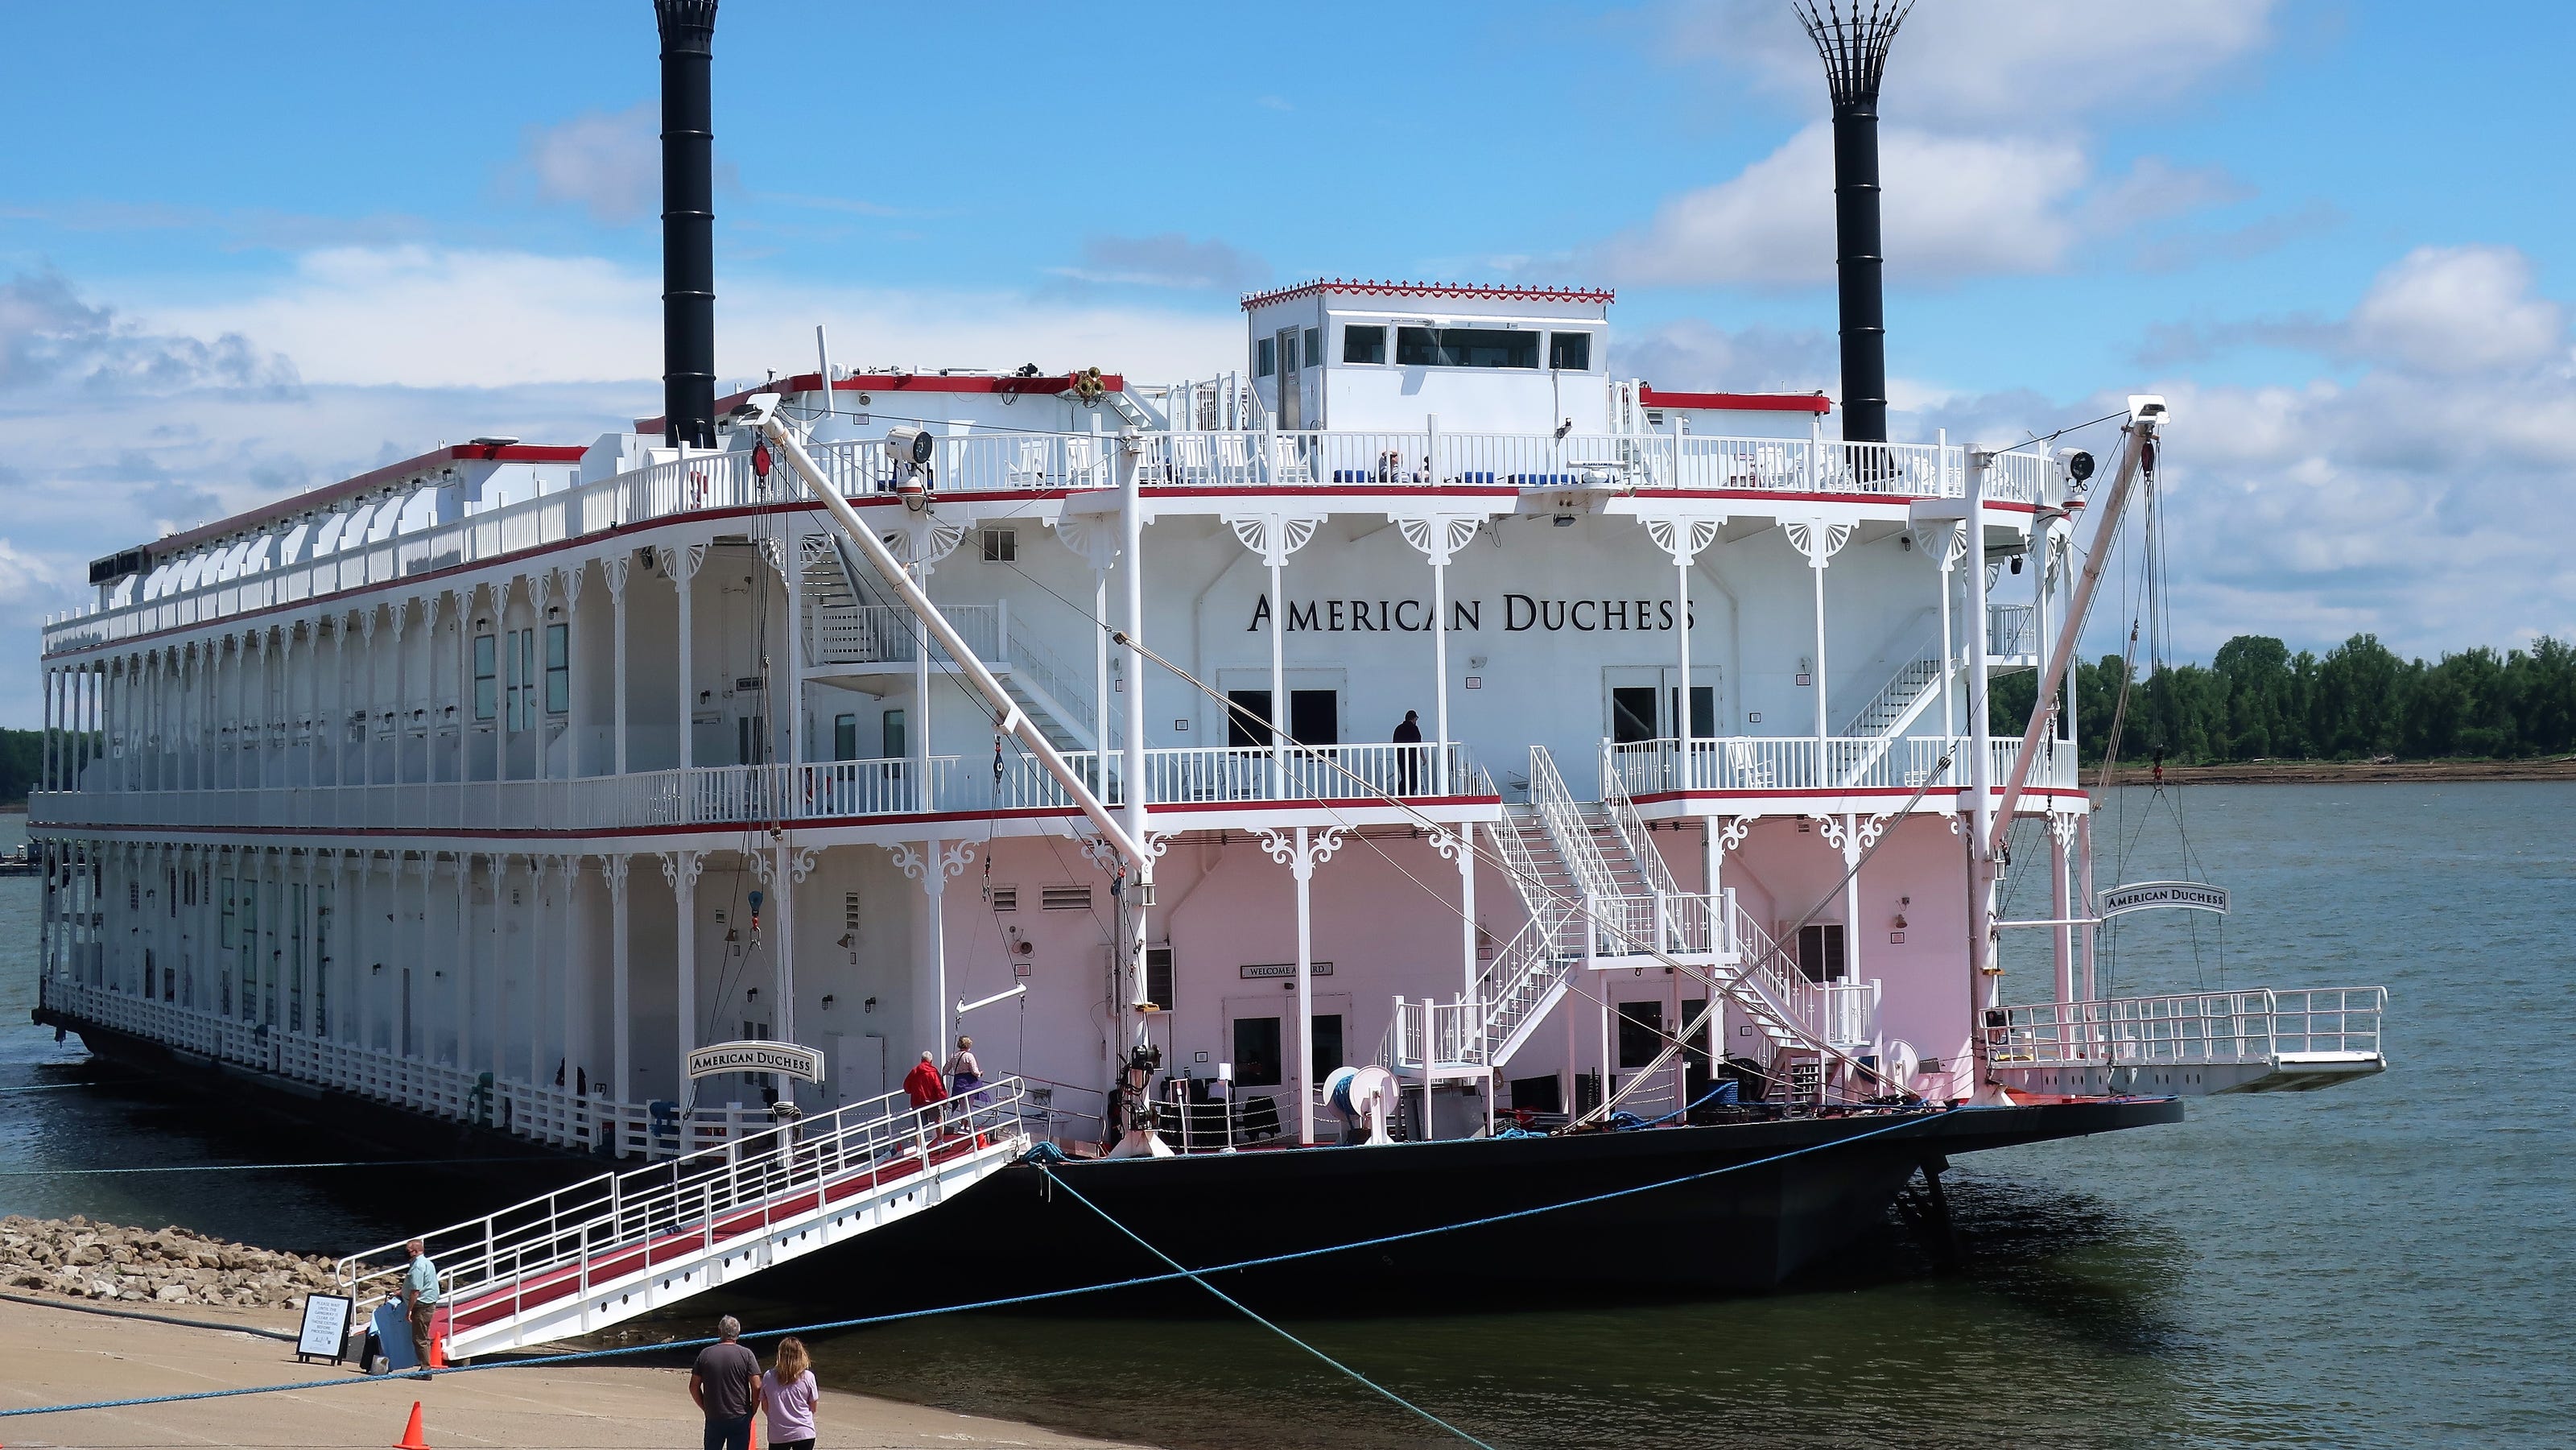 Mississippi River cruises are back What life is like on board?